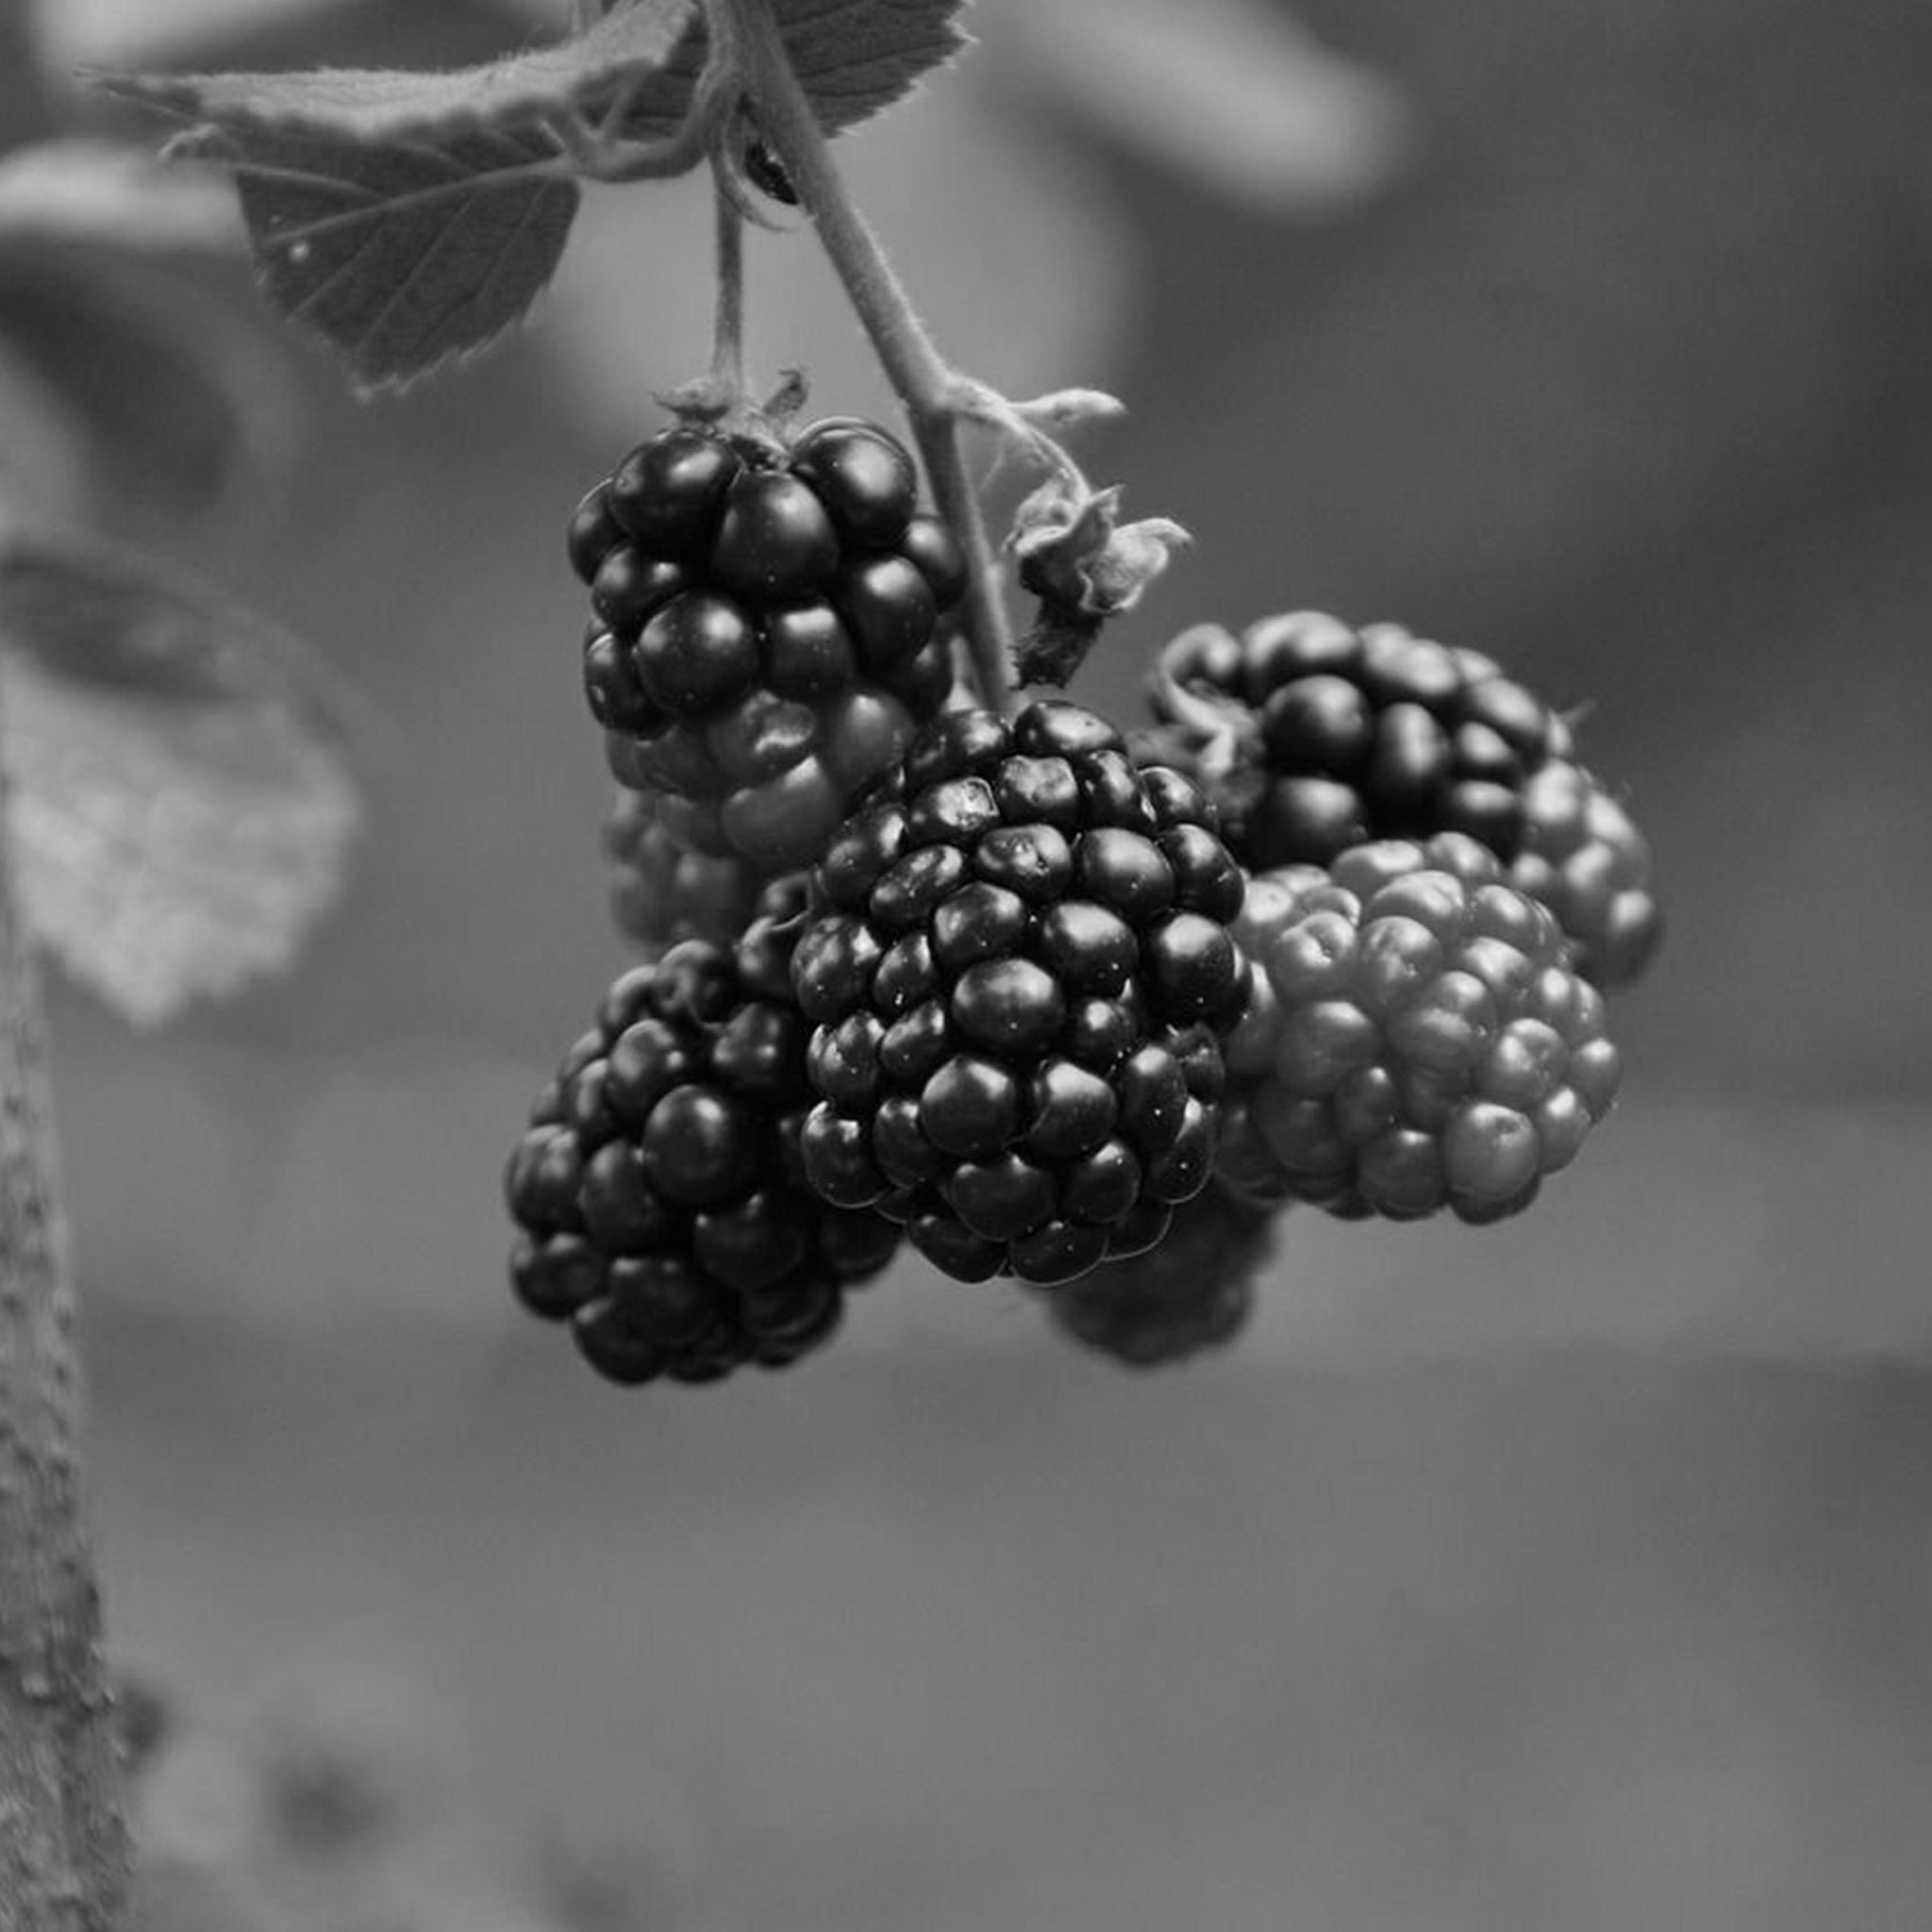 Mulberry extract